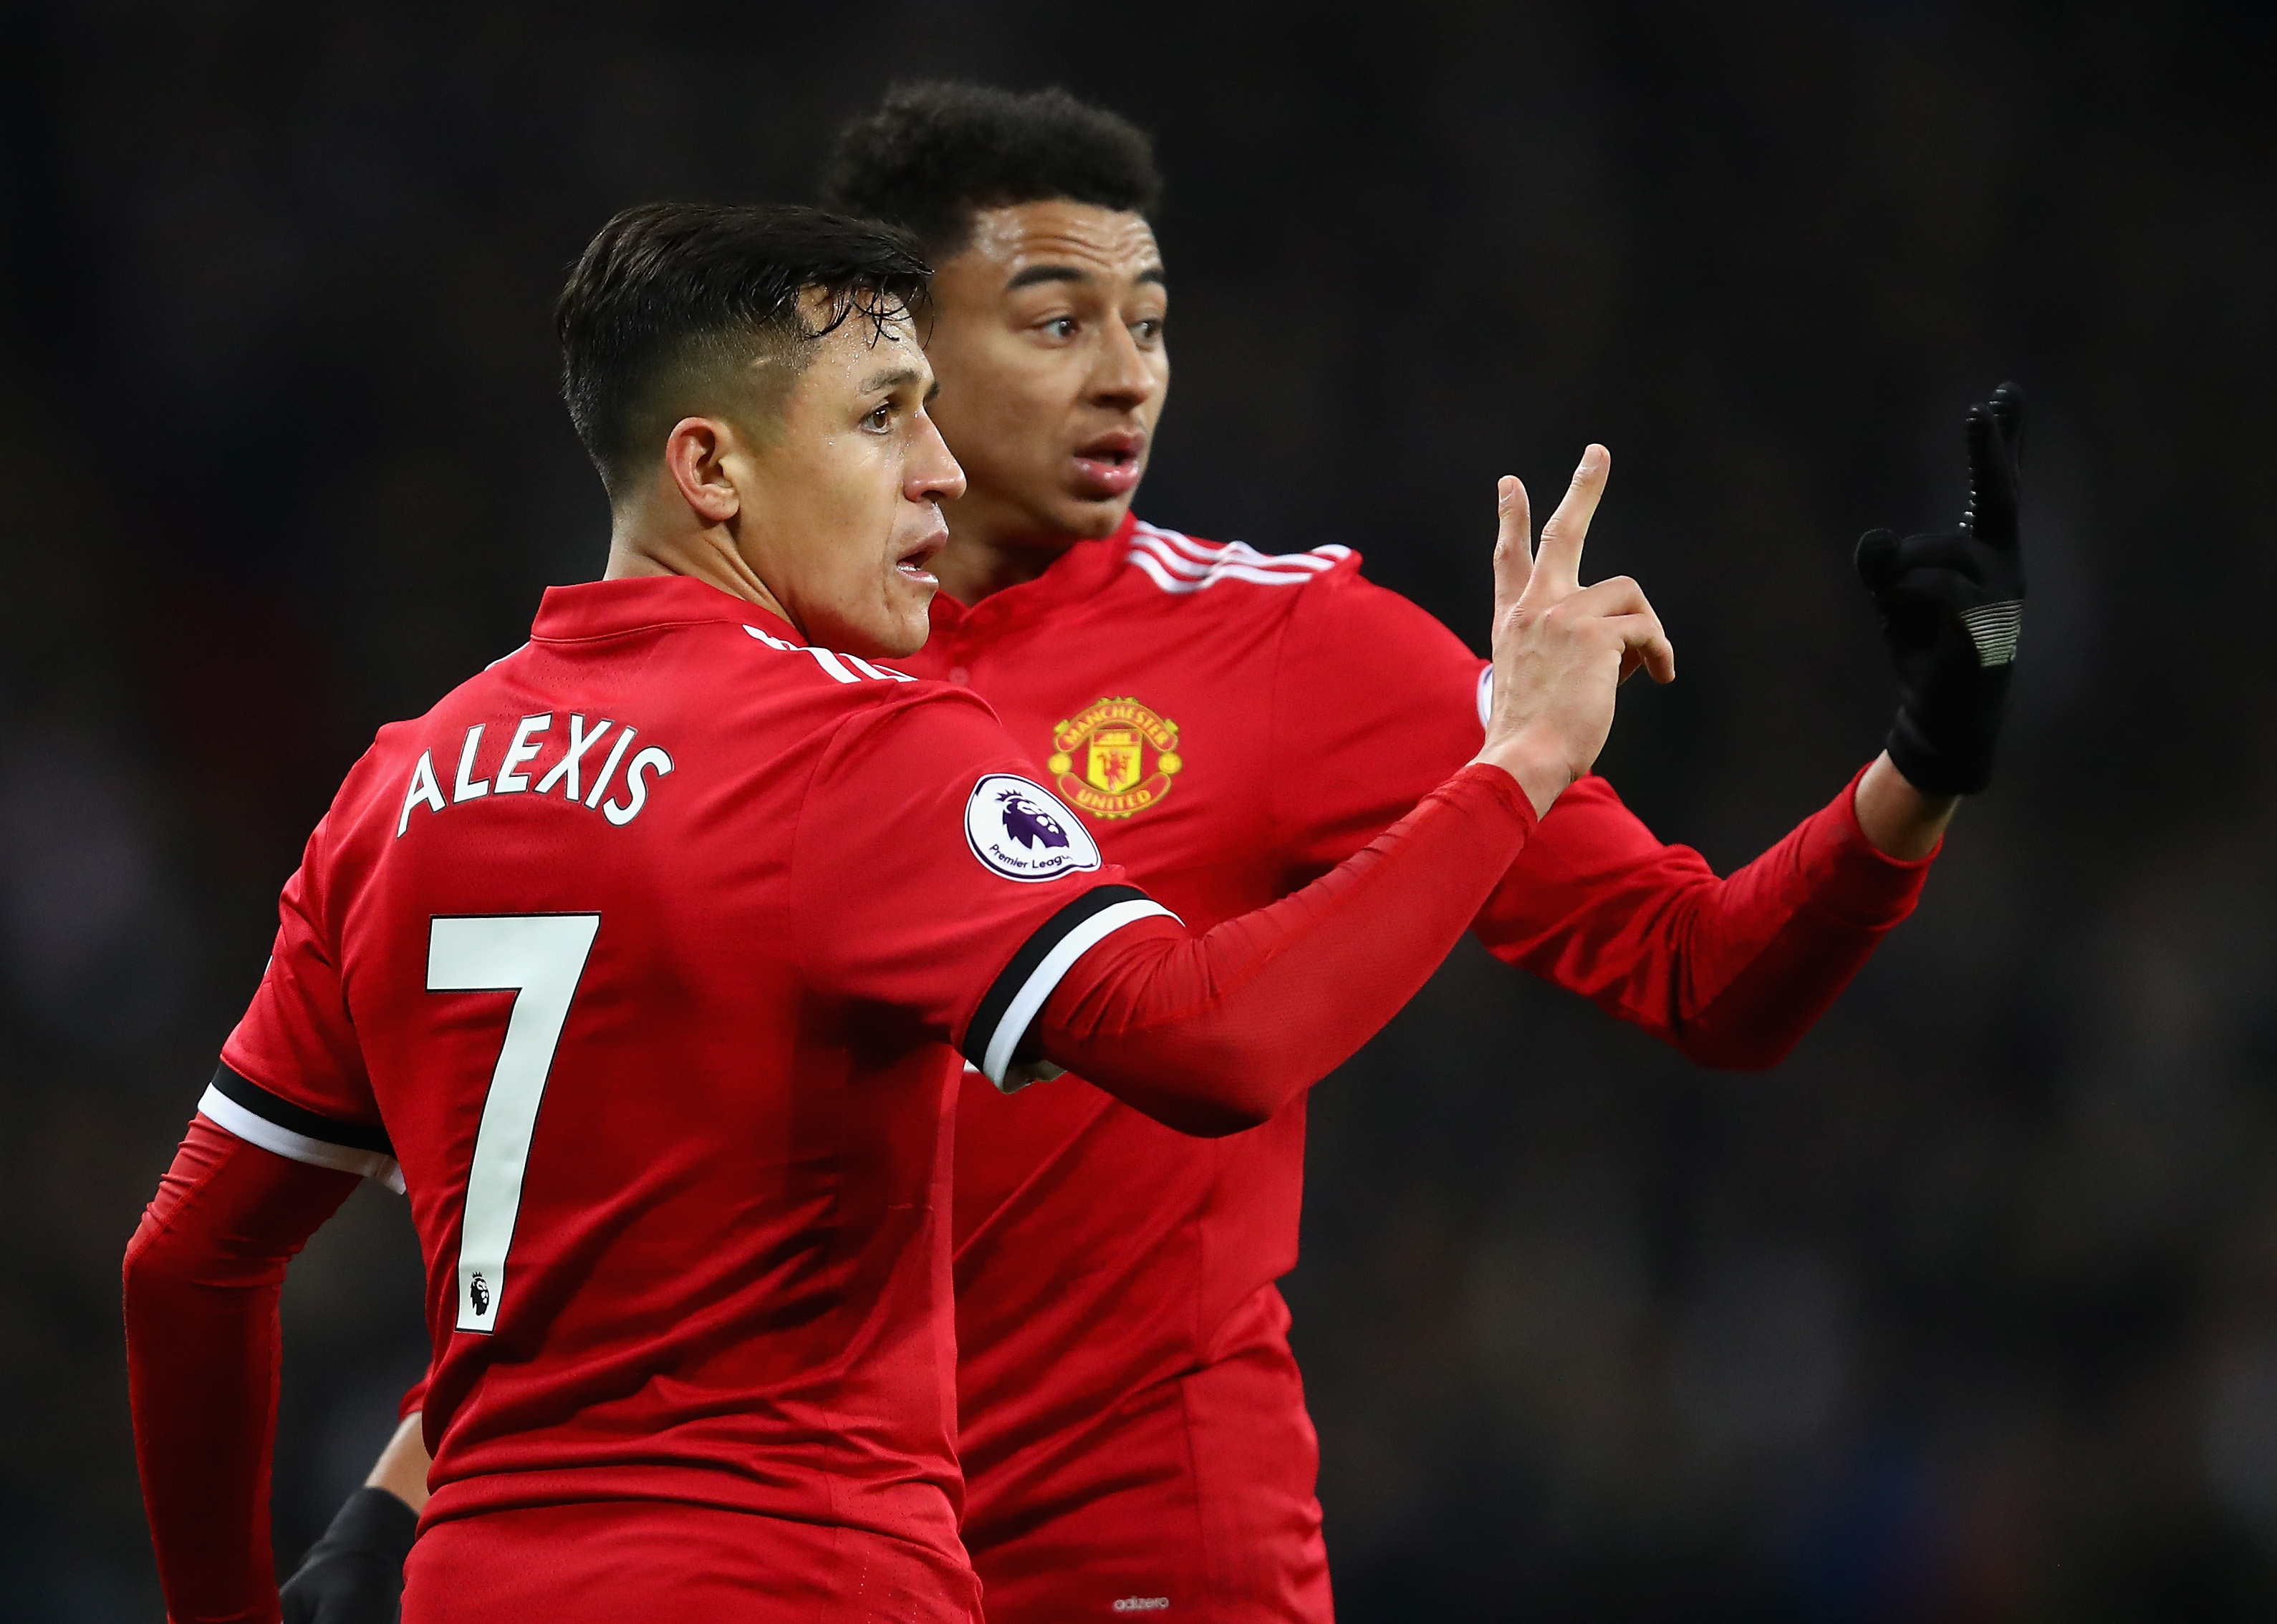 LONDON, ENGLAND - JANUARY 31:  Alexis Sanchez of Manchester United and Jesse Lingard of Manchester United line up a wall during the Premier League match between Tottenham Hotspur and Manchester United at Wembley Stadium on January 31, 2018 in London, England.  (Photo by Julian Finney/Getty Images)